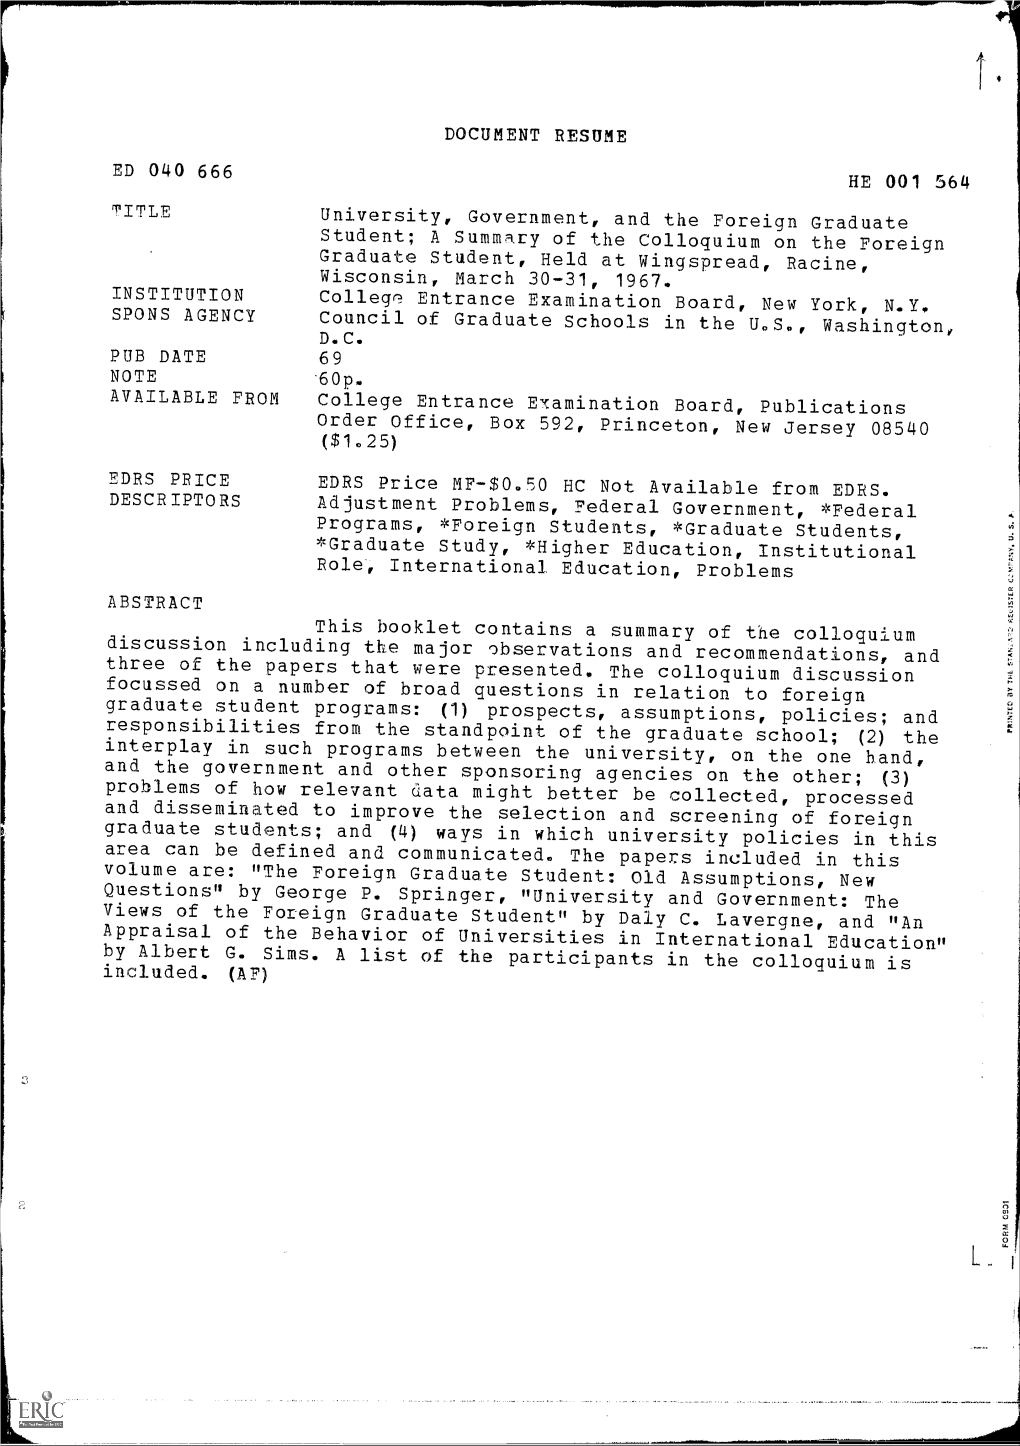 A Summary of Thecolloquium on the Foreign Graduate Student, Heldat Wingspread, Racine, Wisconsin, March 30-31,1967